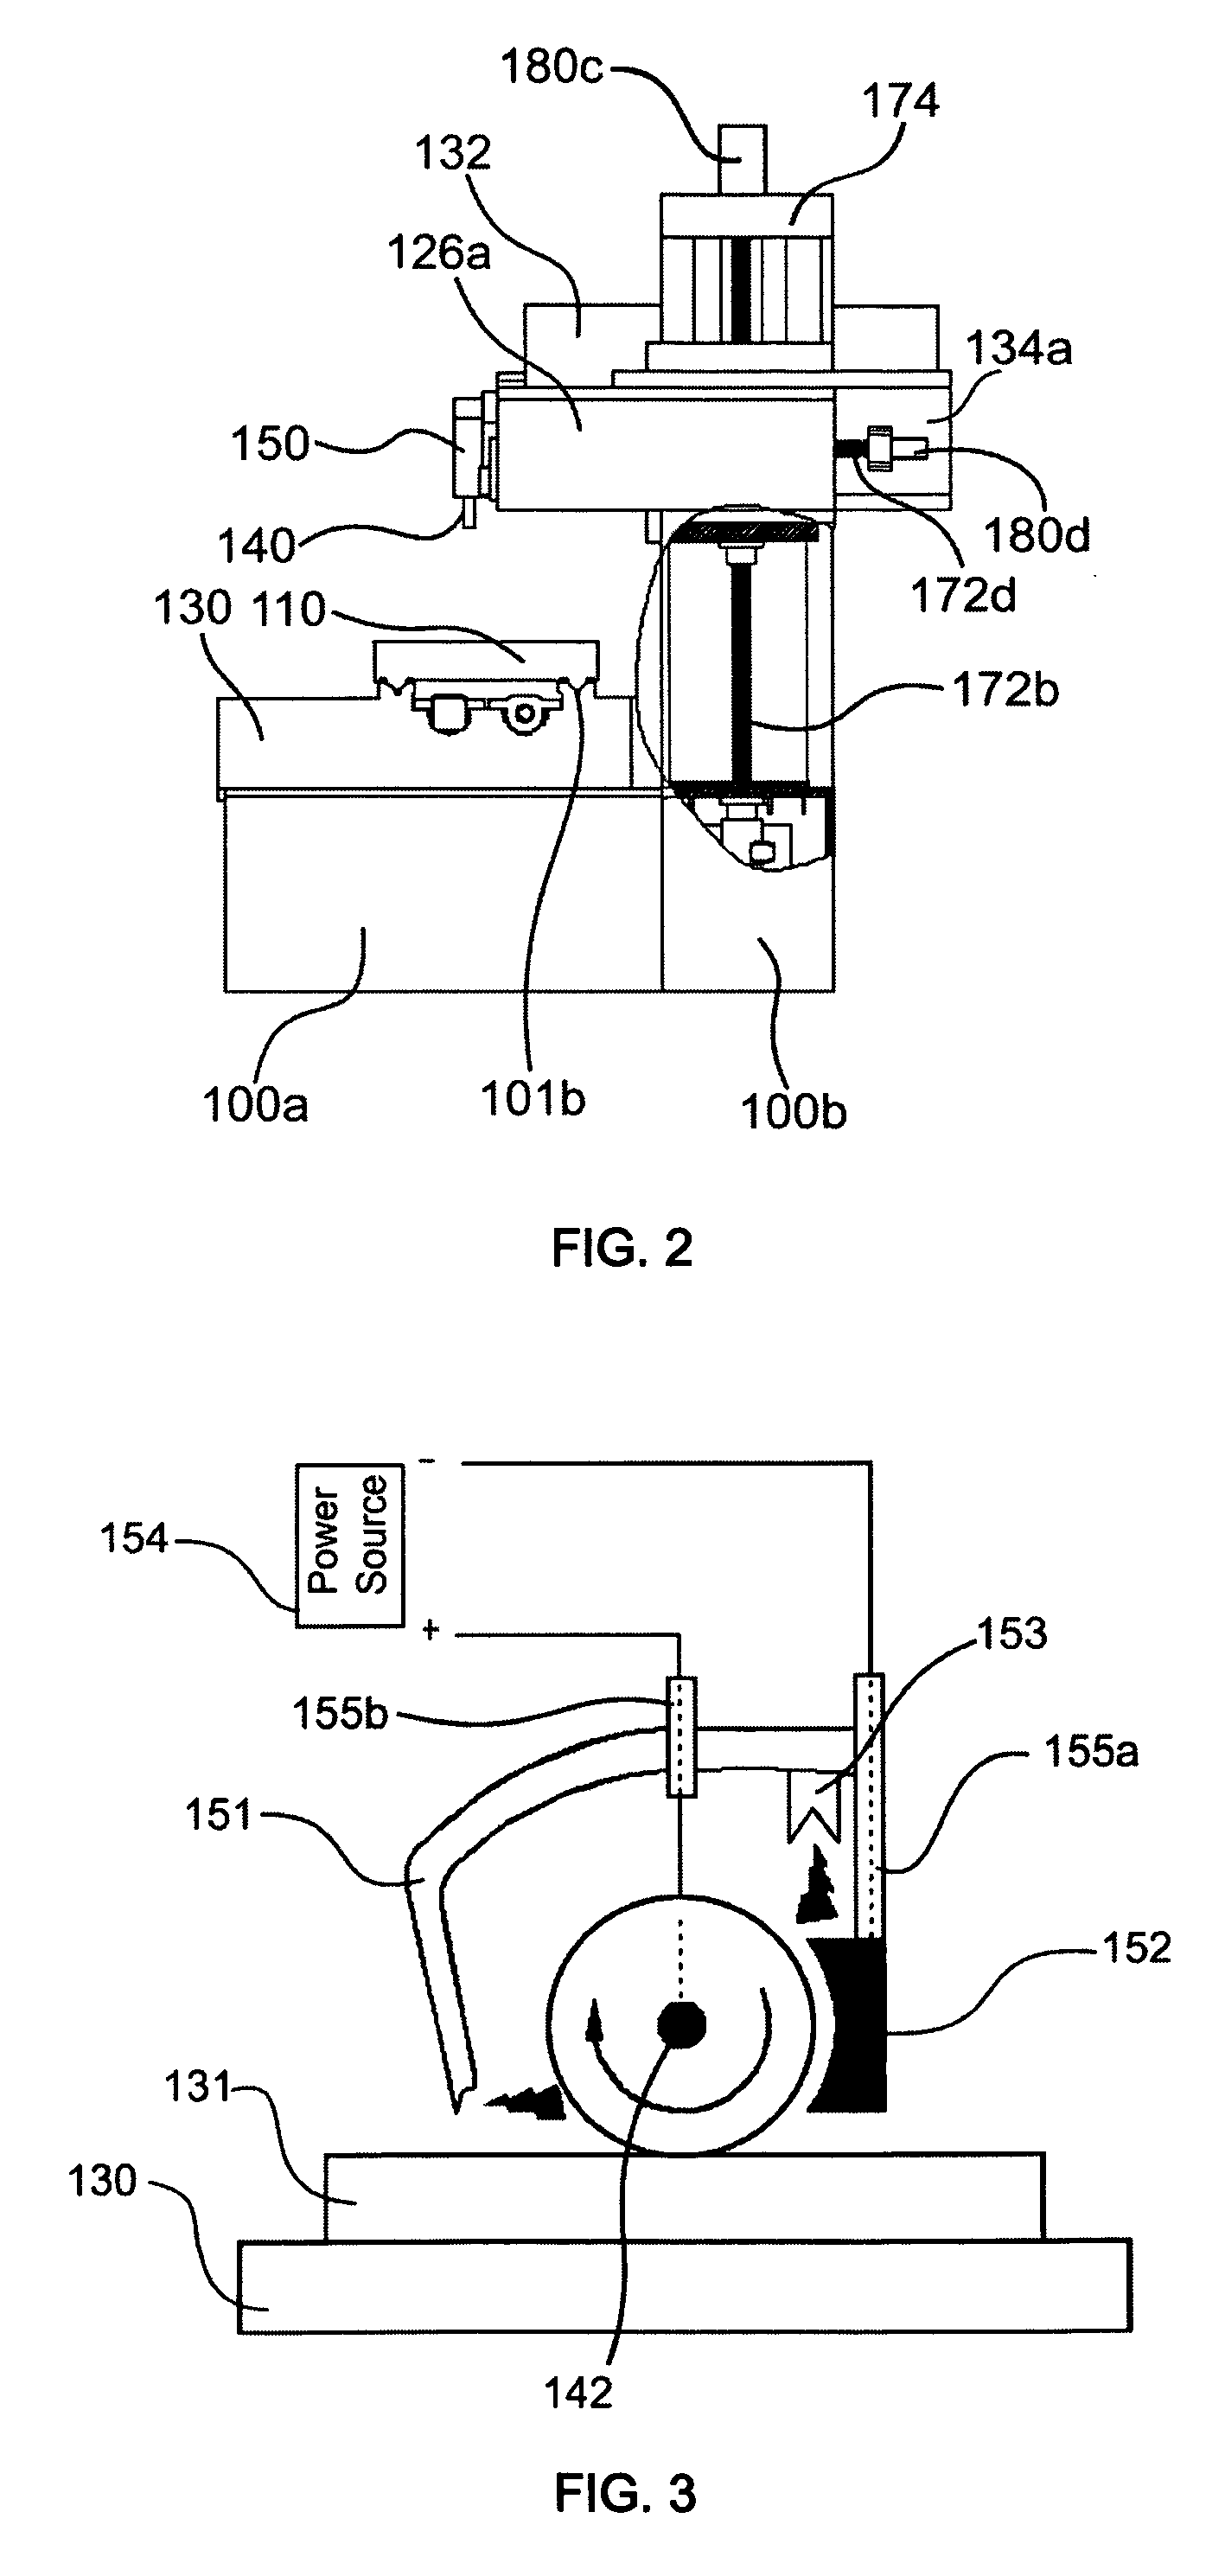 Multi-carriage symmetrical numerically controlled coordinate grinding machine